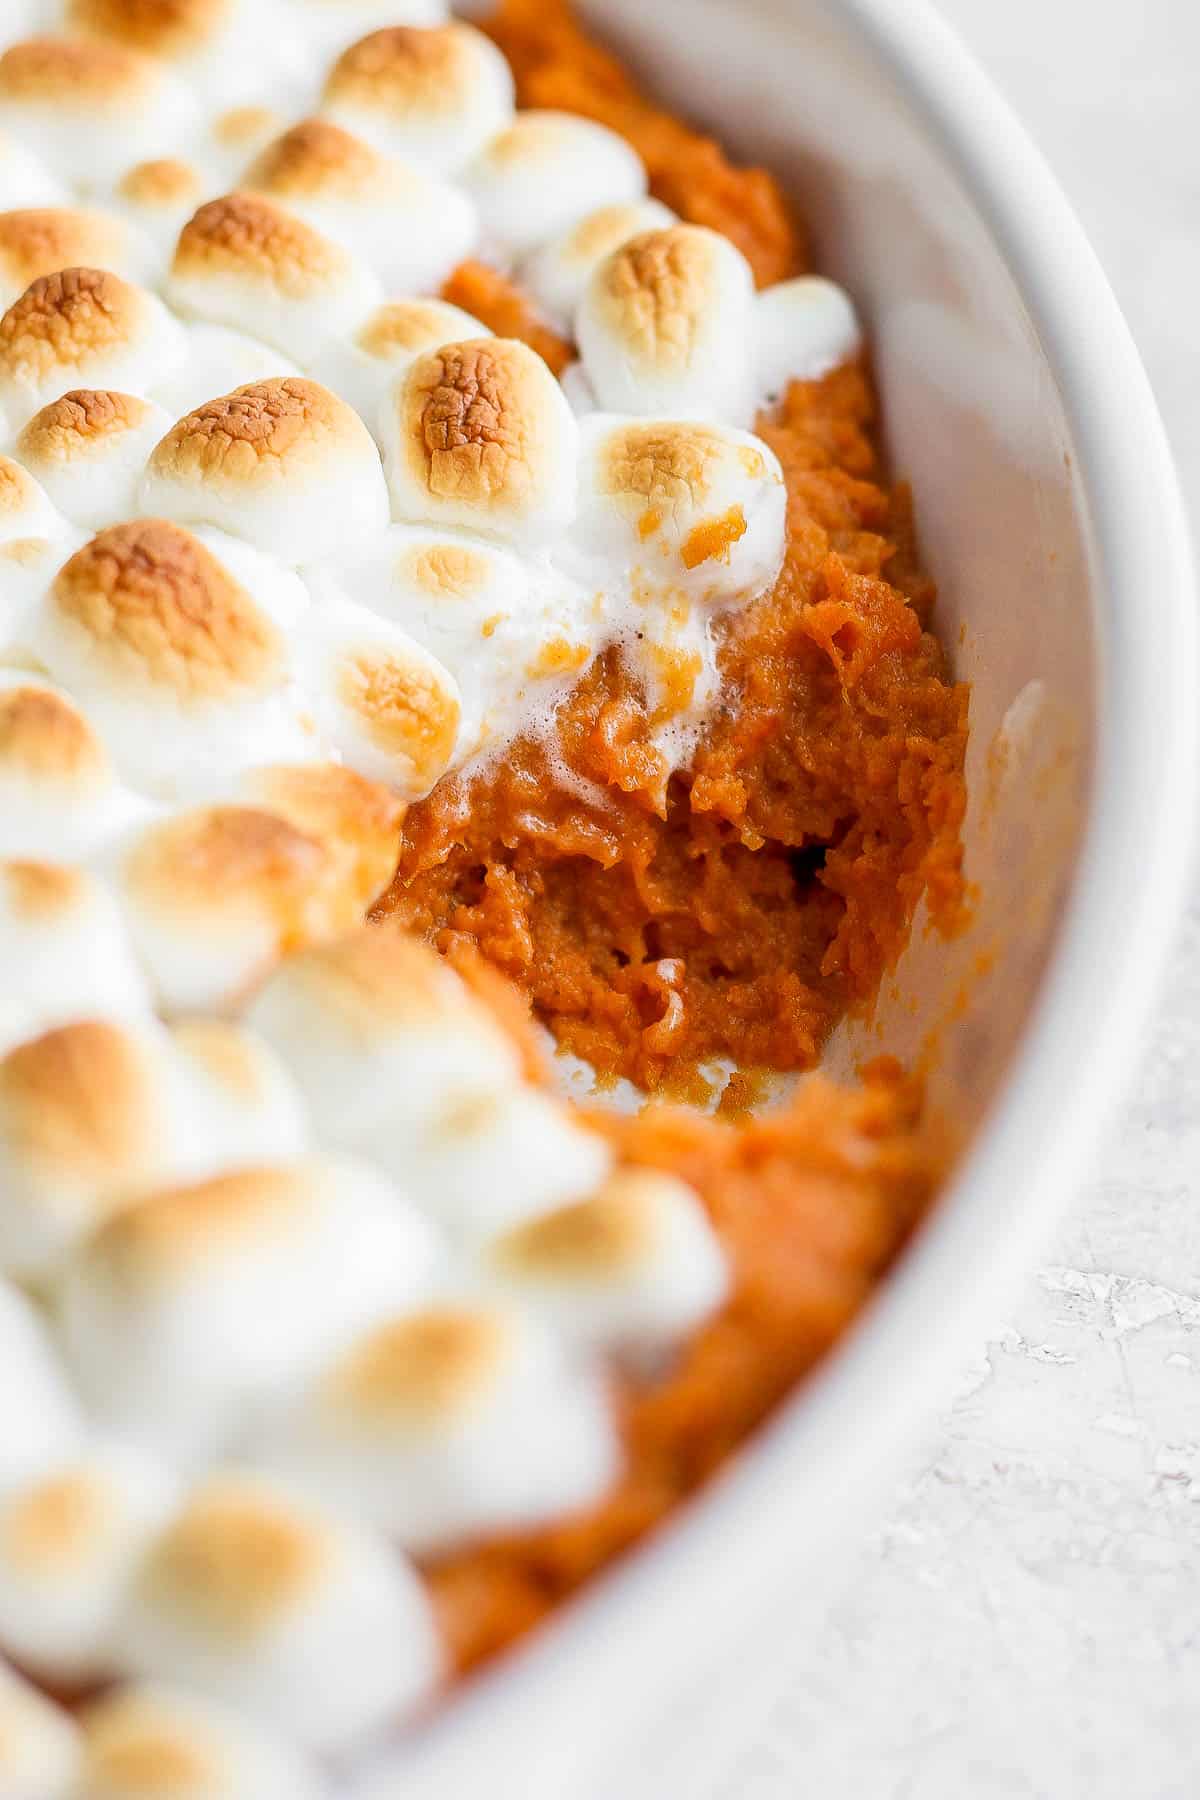 Sweet potato casserole with marshmallows in a casserole dish with a section removed in order to see the creamy middle.